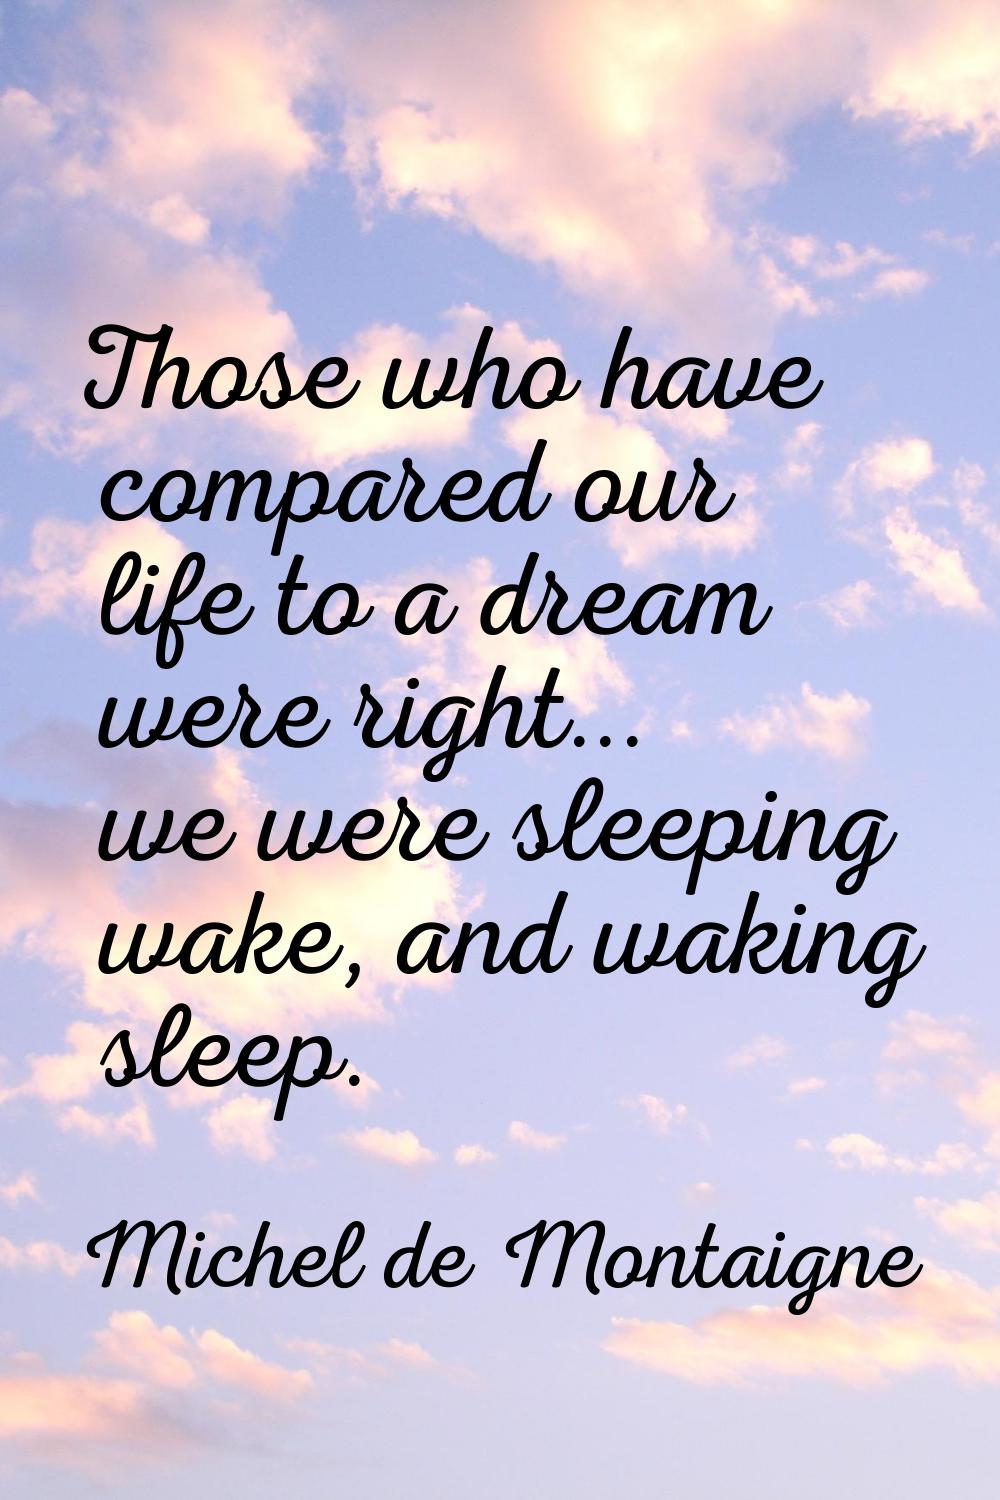 Those who have compared our life to a dream were right... we were sleeping wake, and waking sleep.